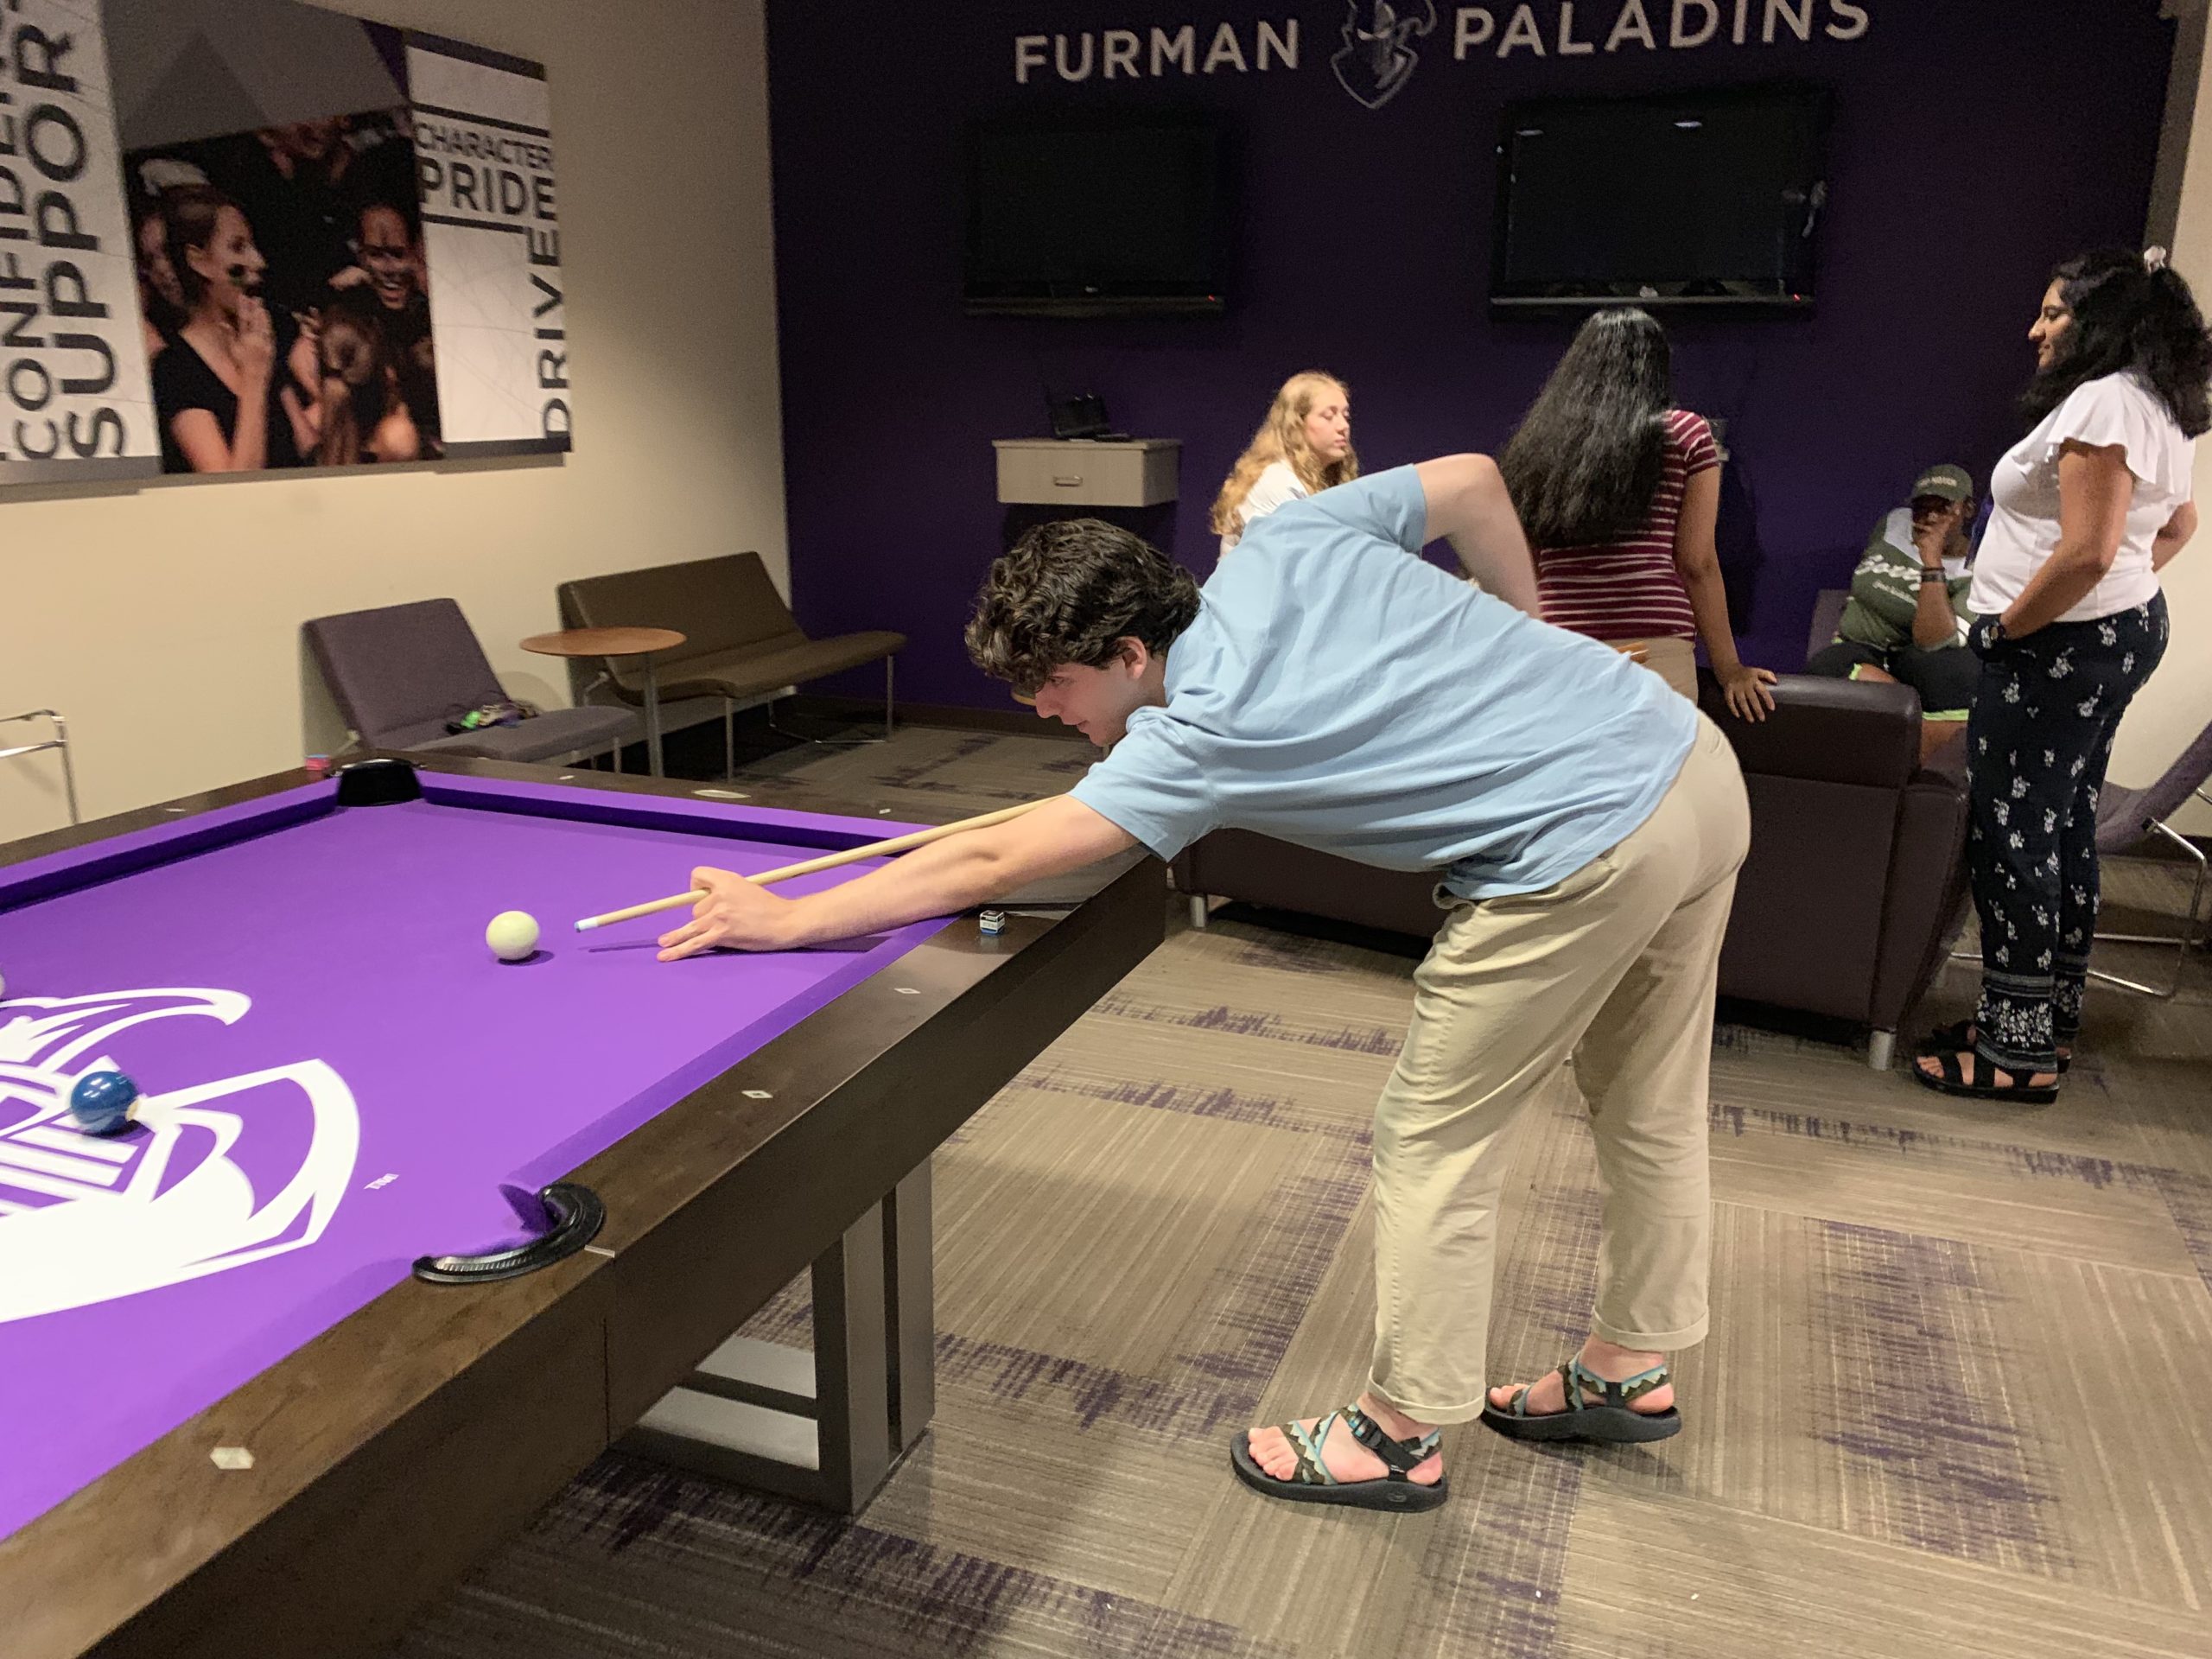 Jake playing billiards at the union on campus